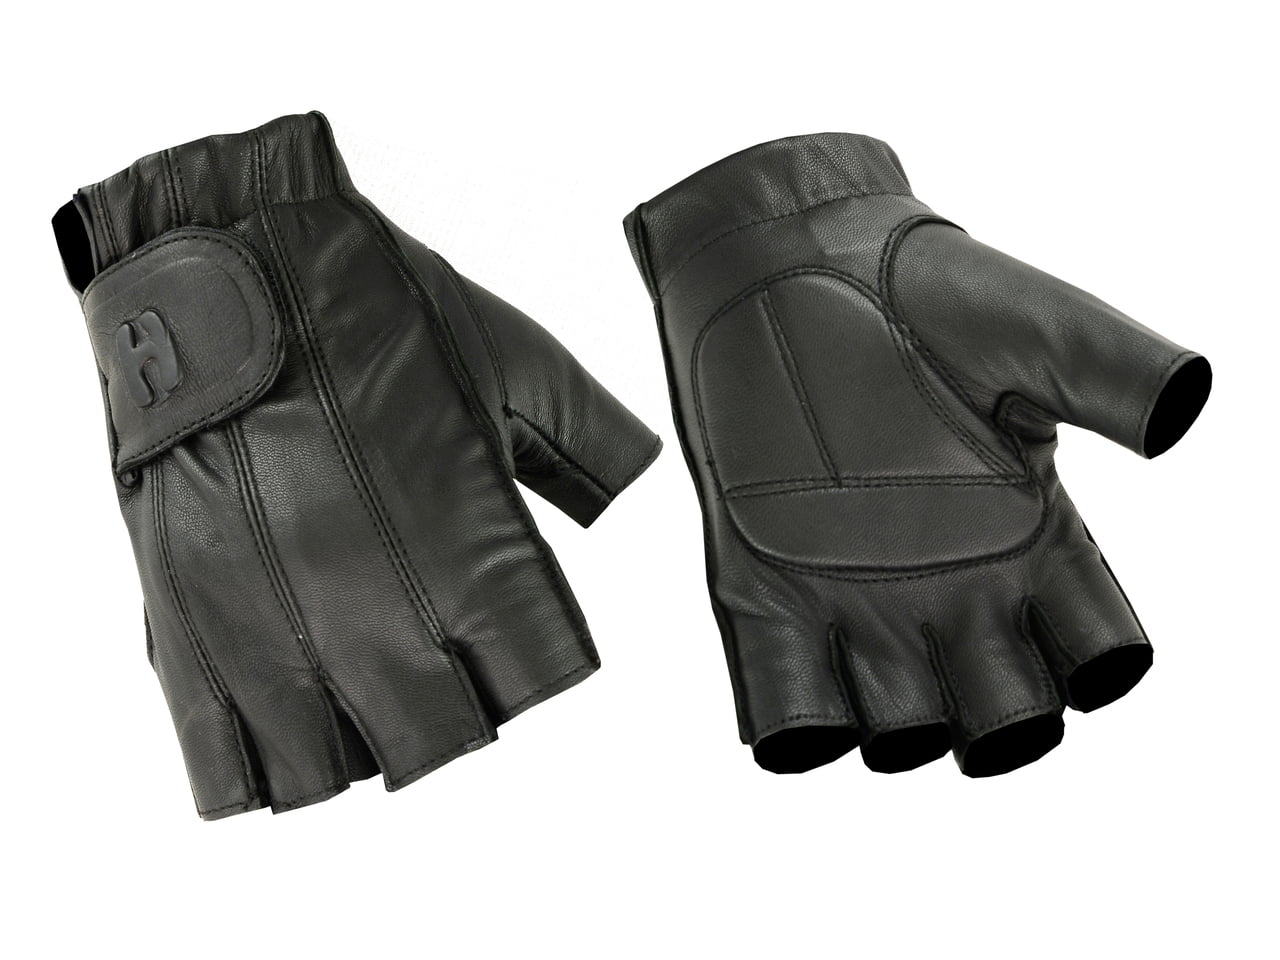 Men's Fingerless Leather Gloves with Gel Palm